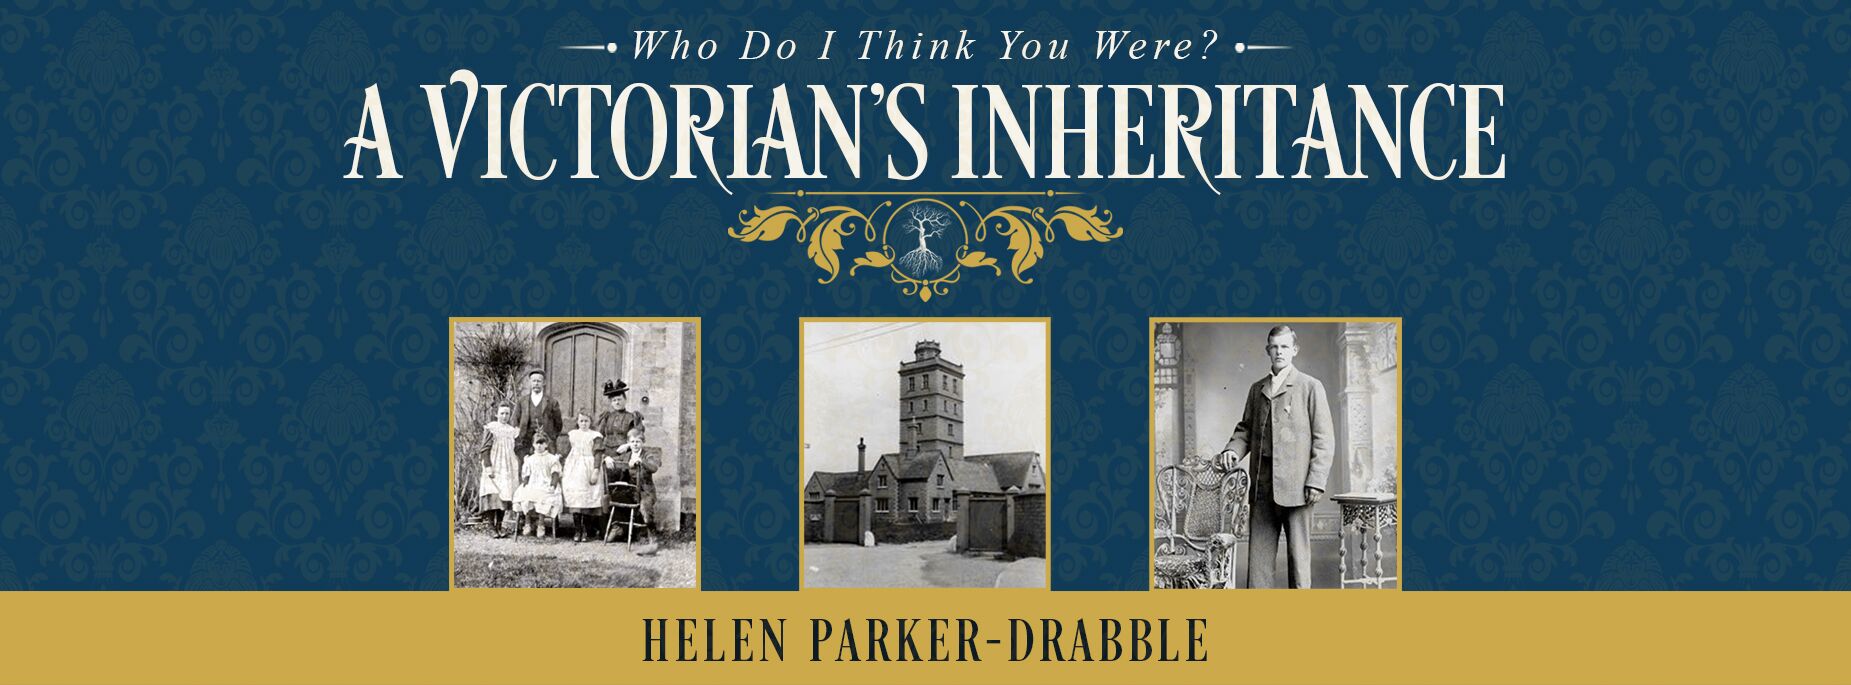 Banner 'Who Do I Think You Were?' A Victorian's Inheritance by Helen Parker-Drabble